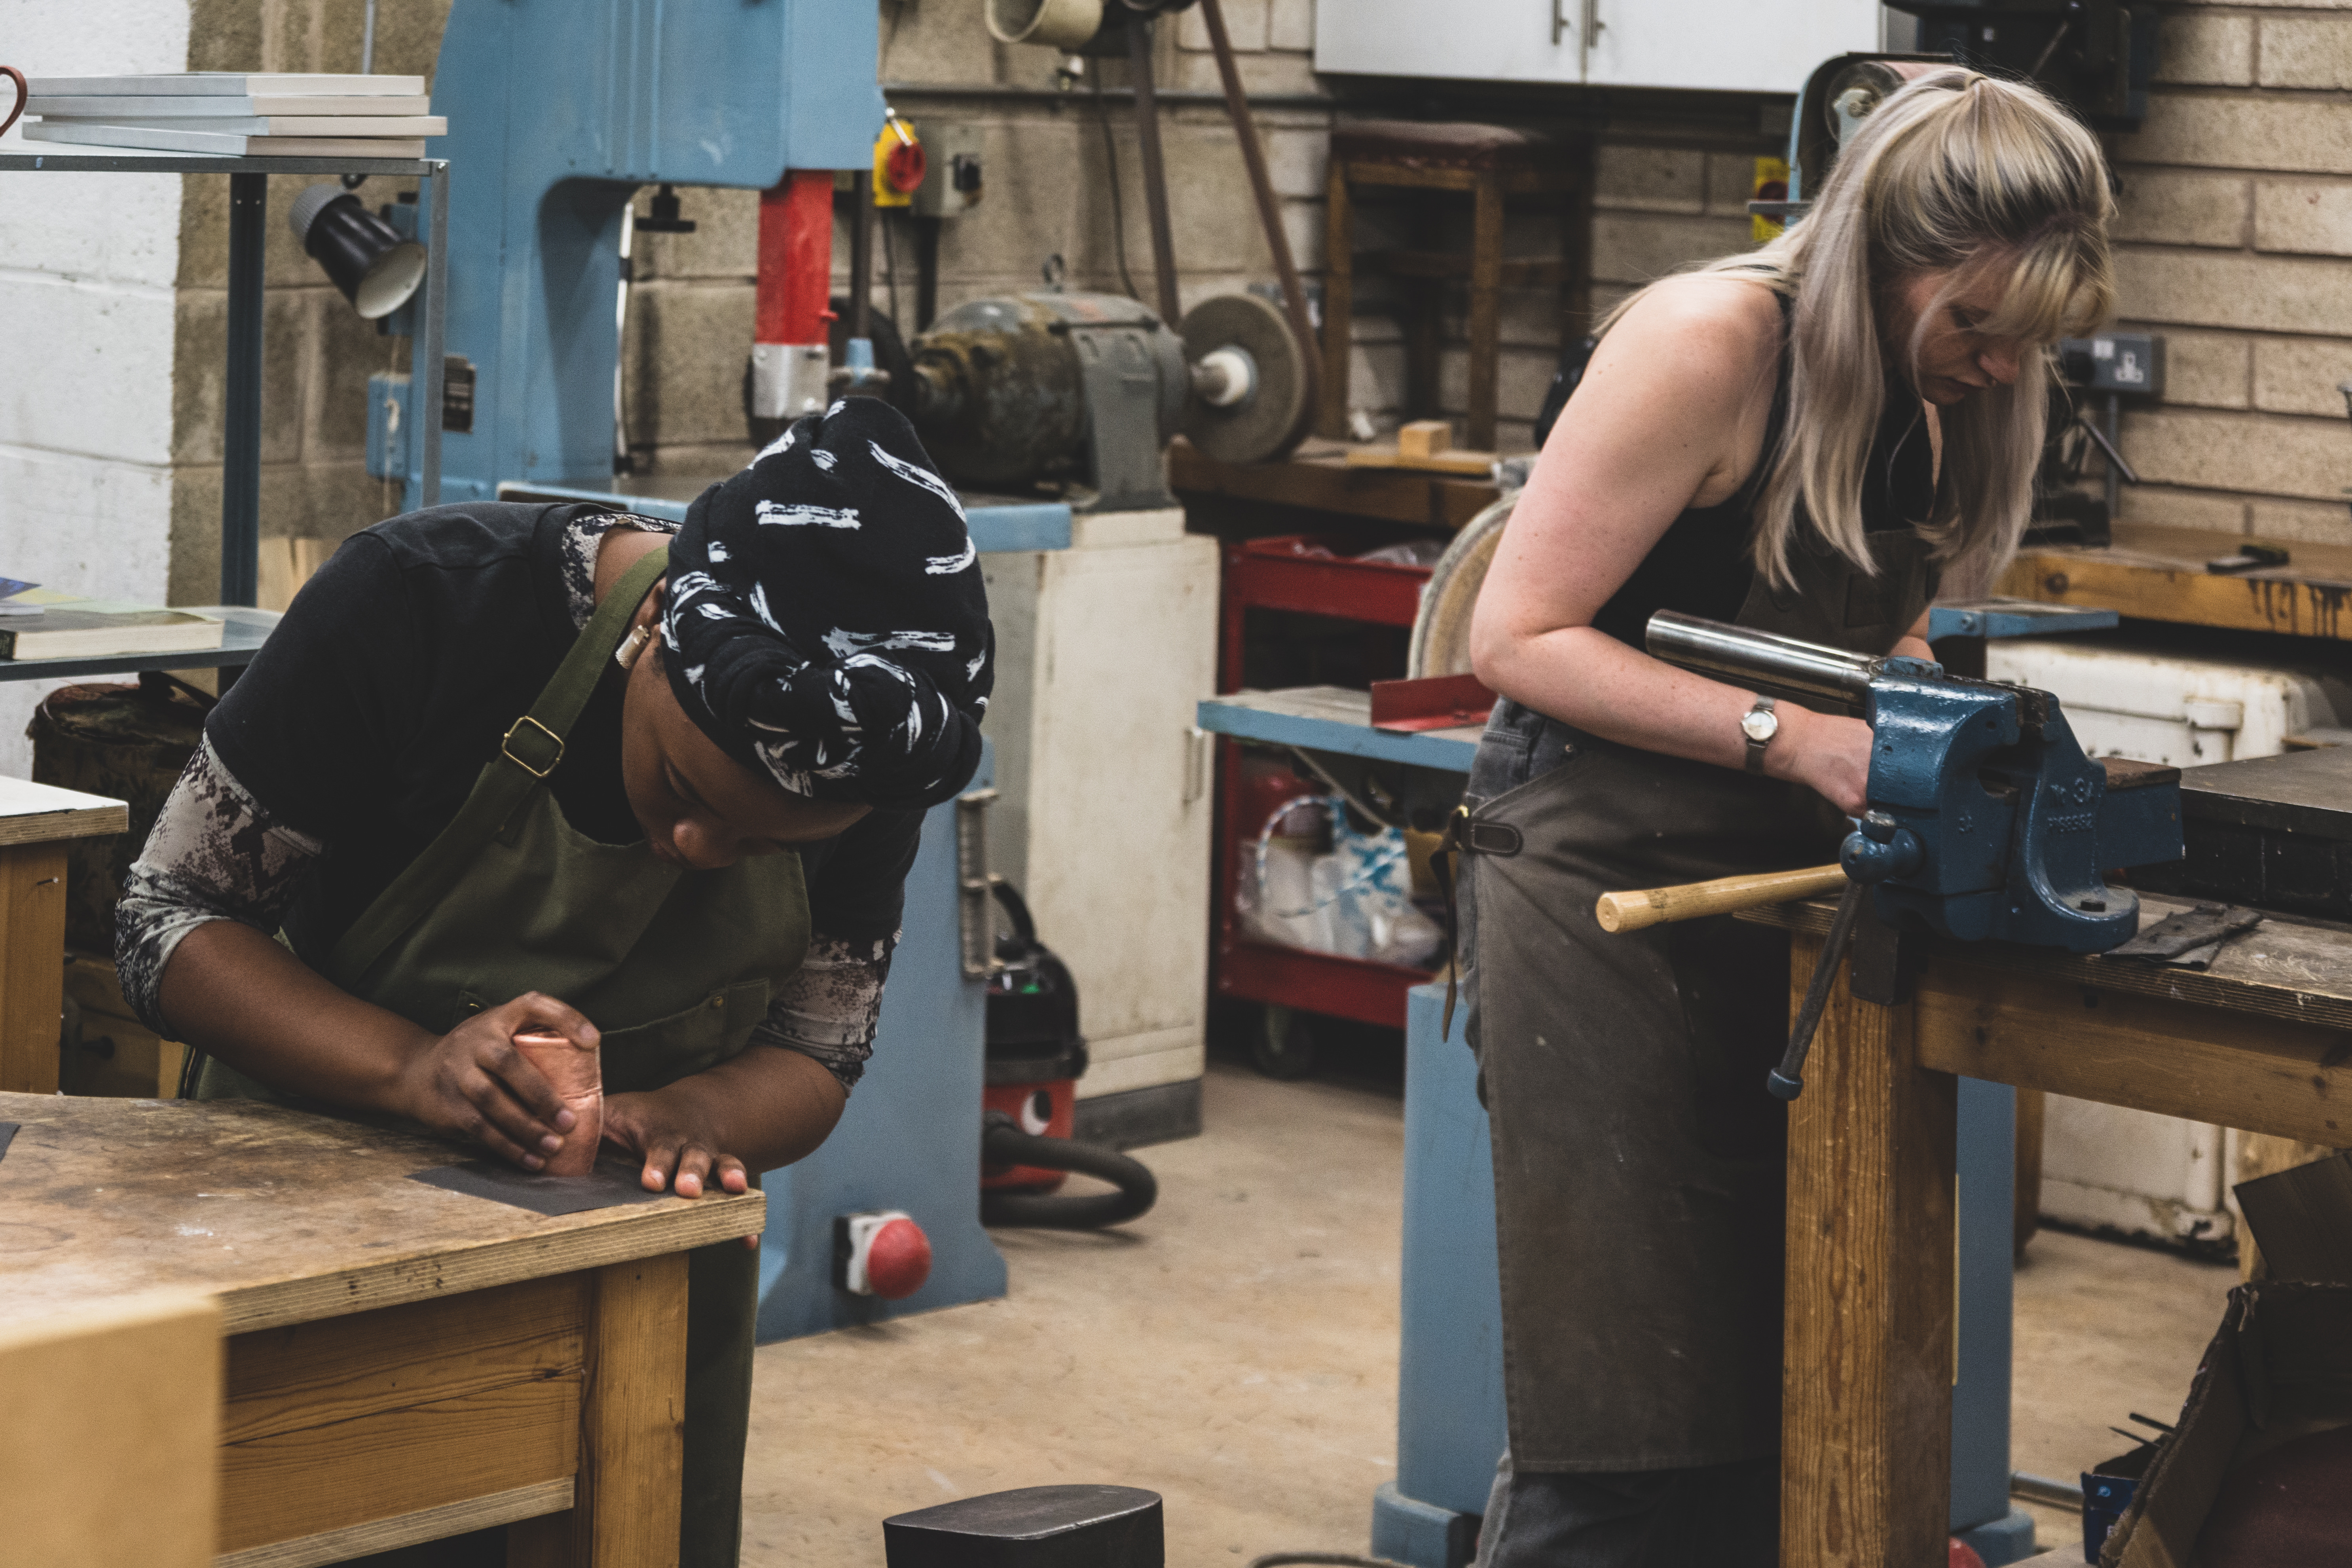 Two women working with carving tools in a workshop space